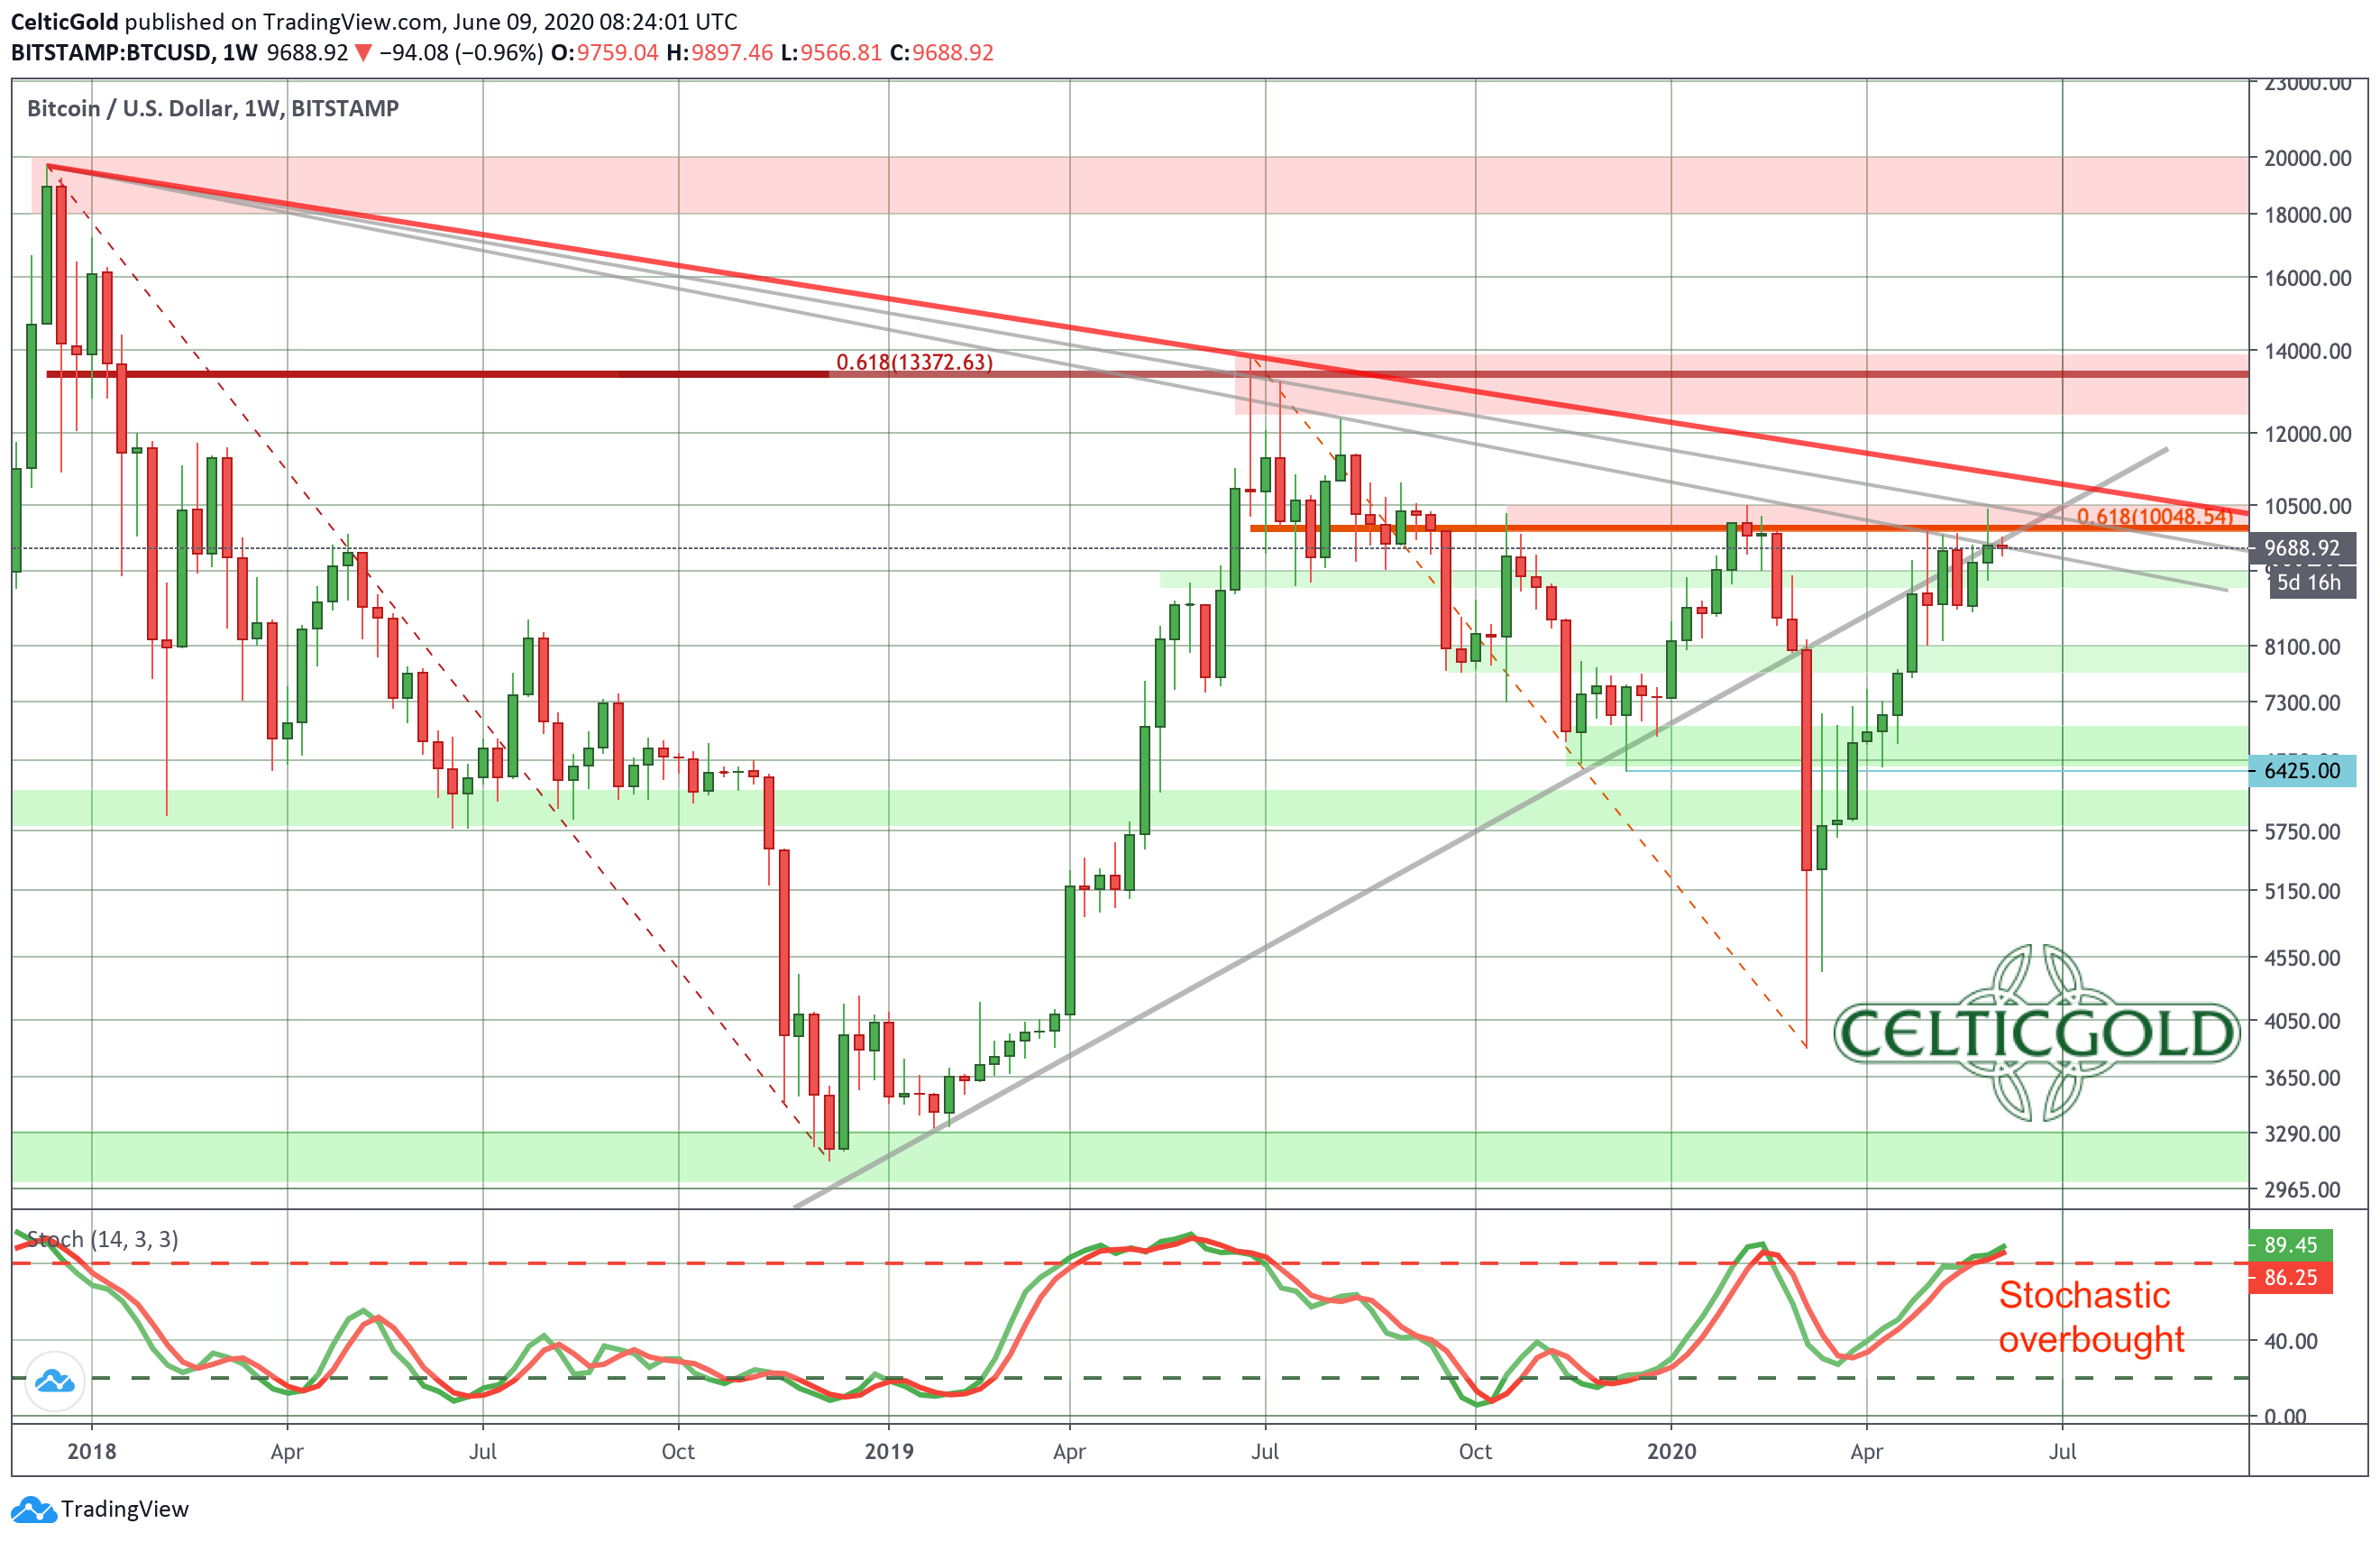 Bitcoin Weekly Chart as of June 9th 2020, Source: Tradingview